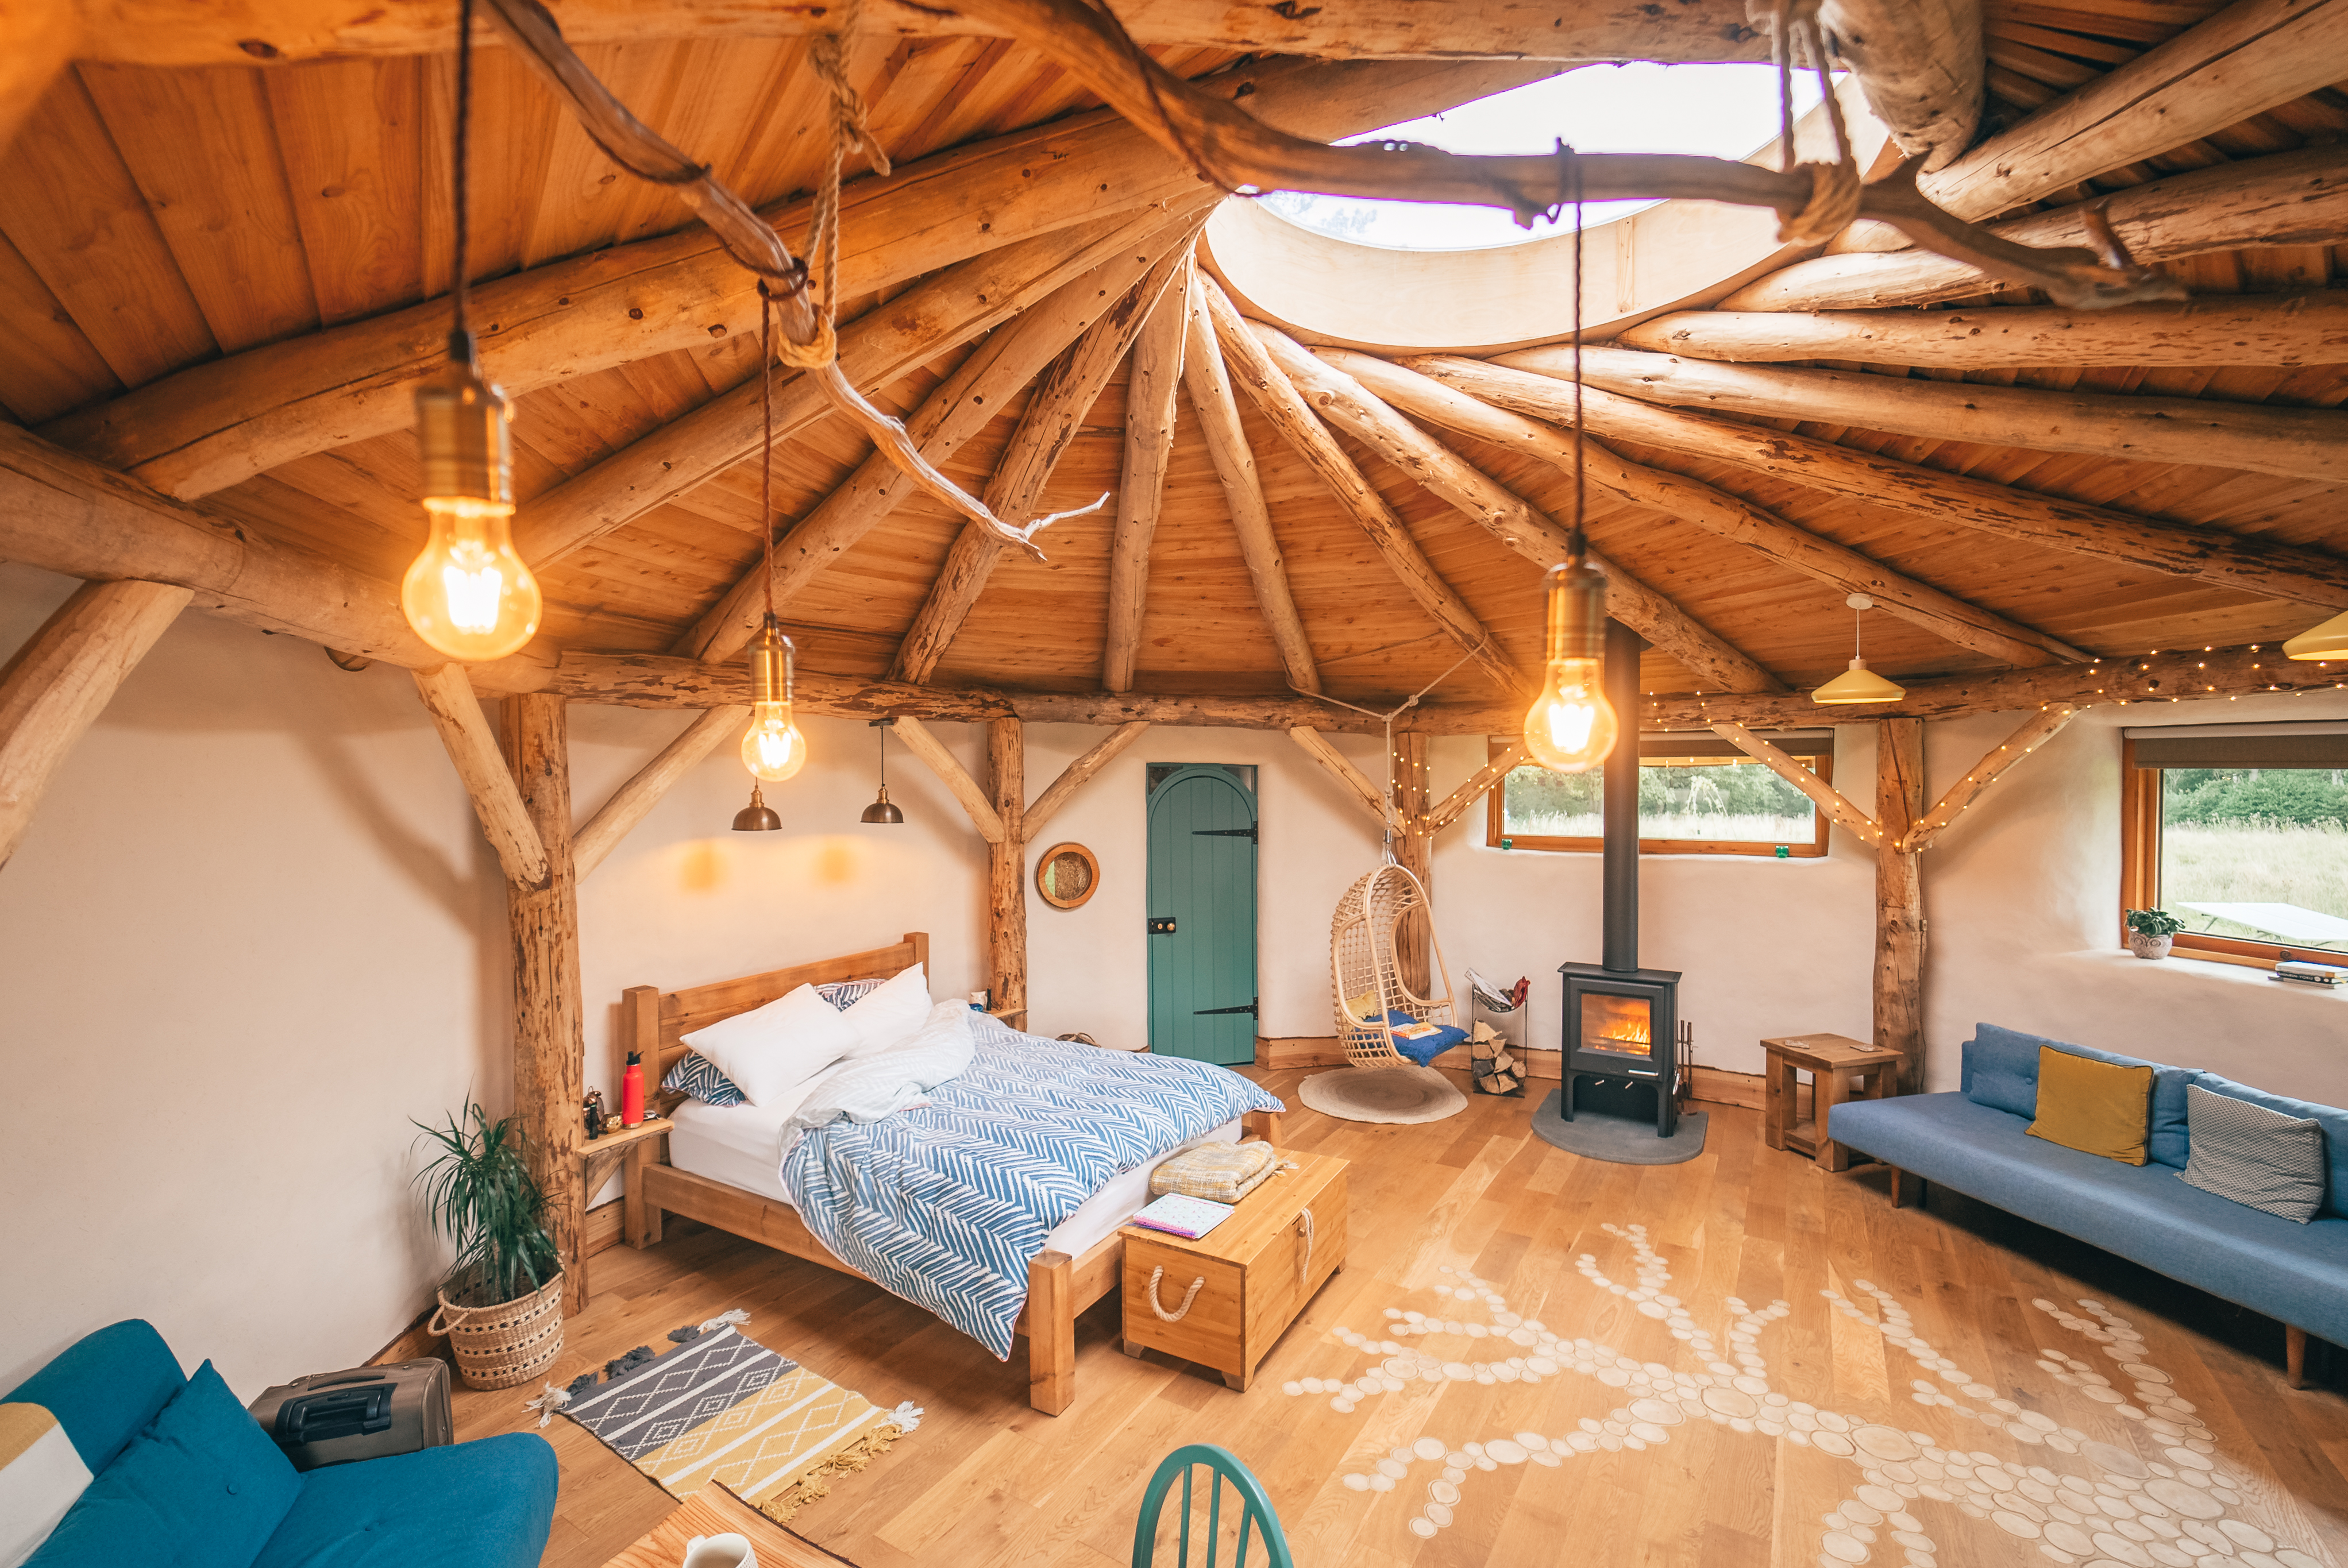 Round the Woods - Willow Roundhouse sleeps 7 + cot bed